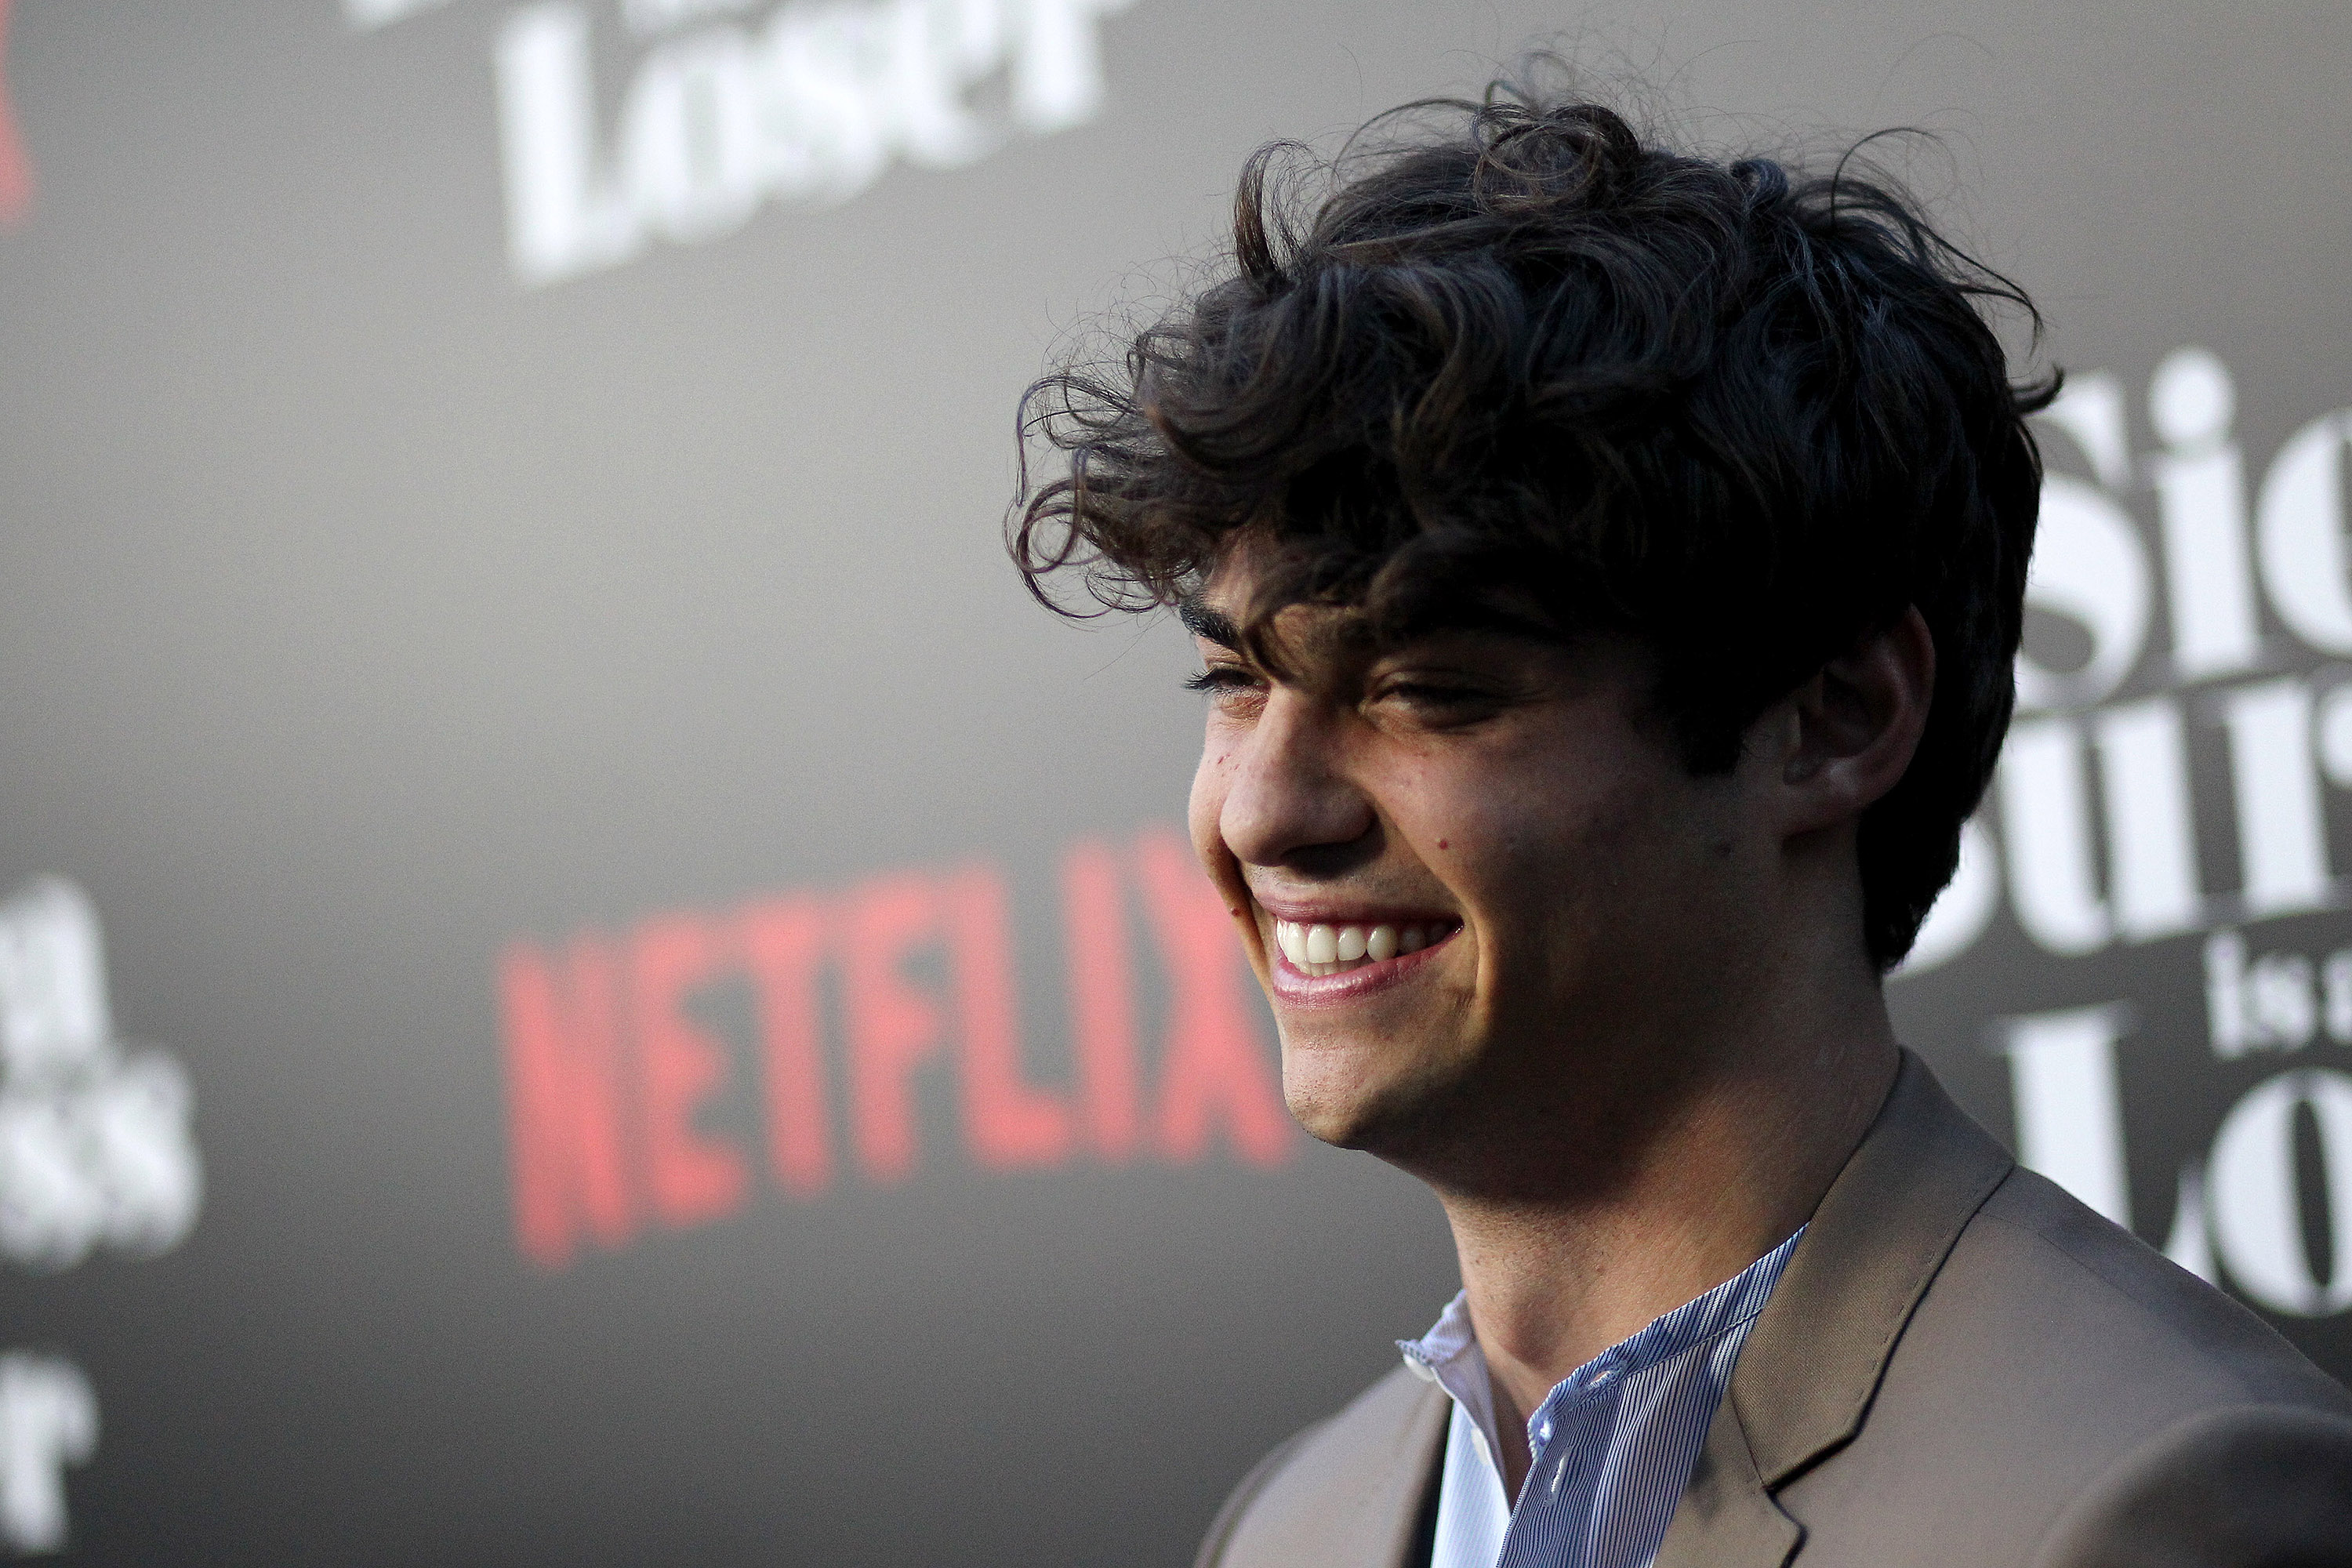 Noah Centineo, Peter Kavinsky, and the wholesome internet boyfriend